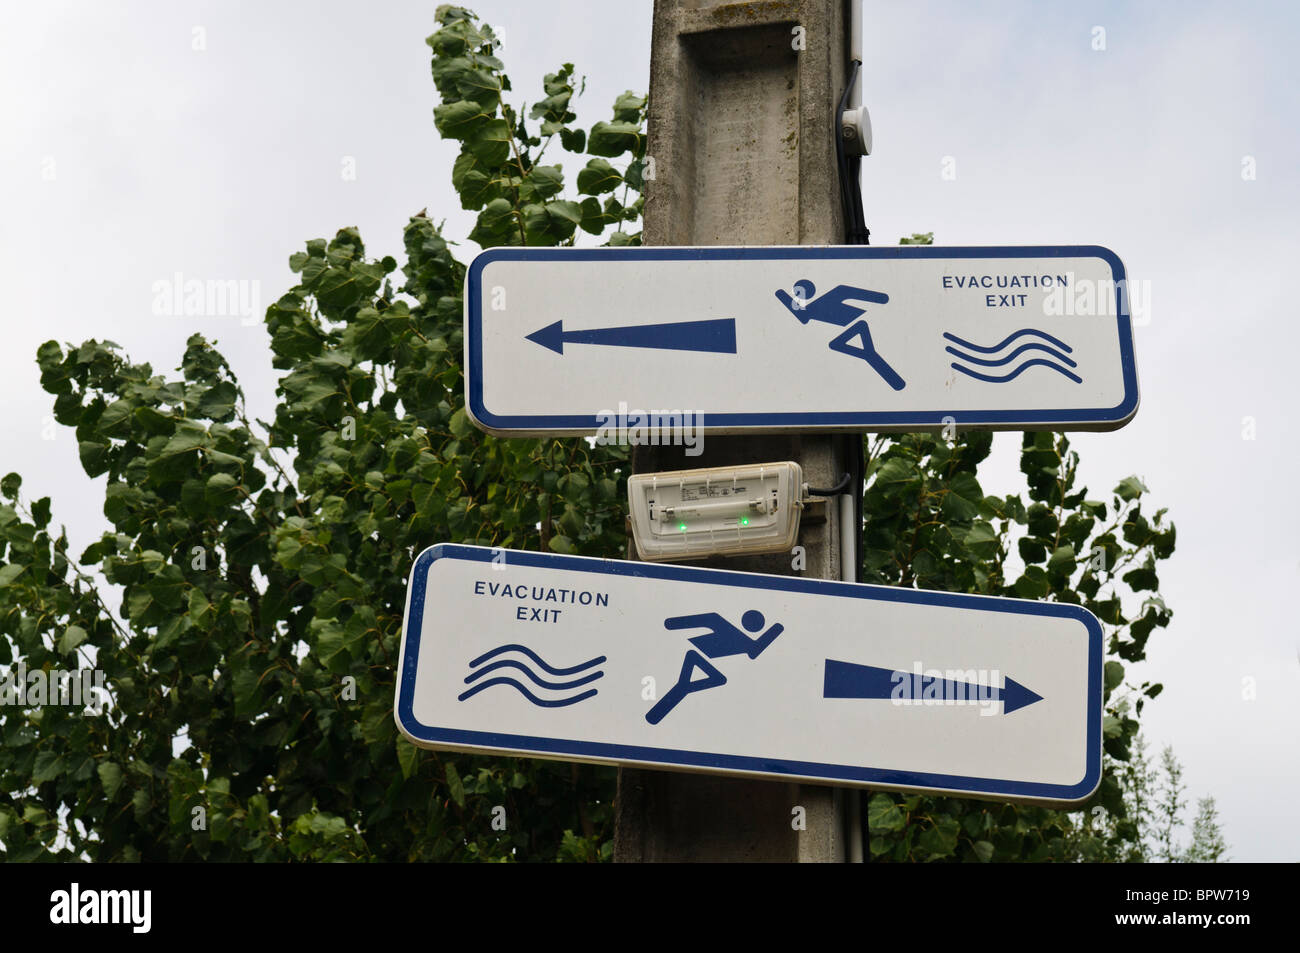 Signs pointing both left and right, indicating evacuation route in the event of flooding. Stock Photo